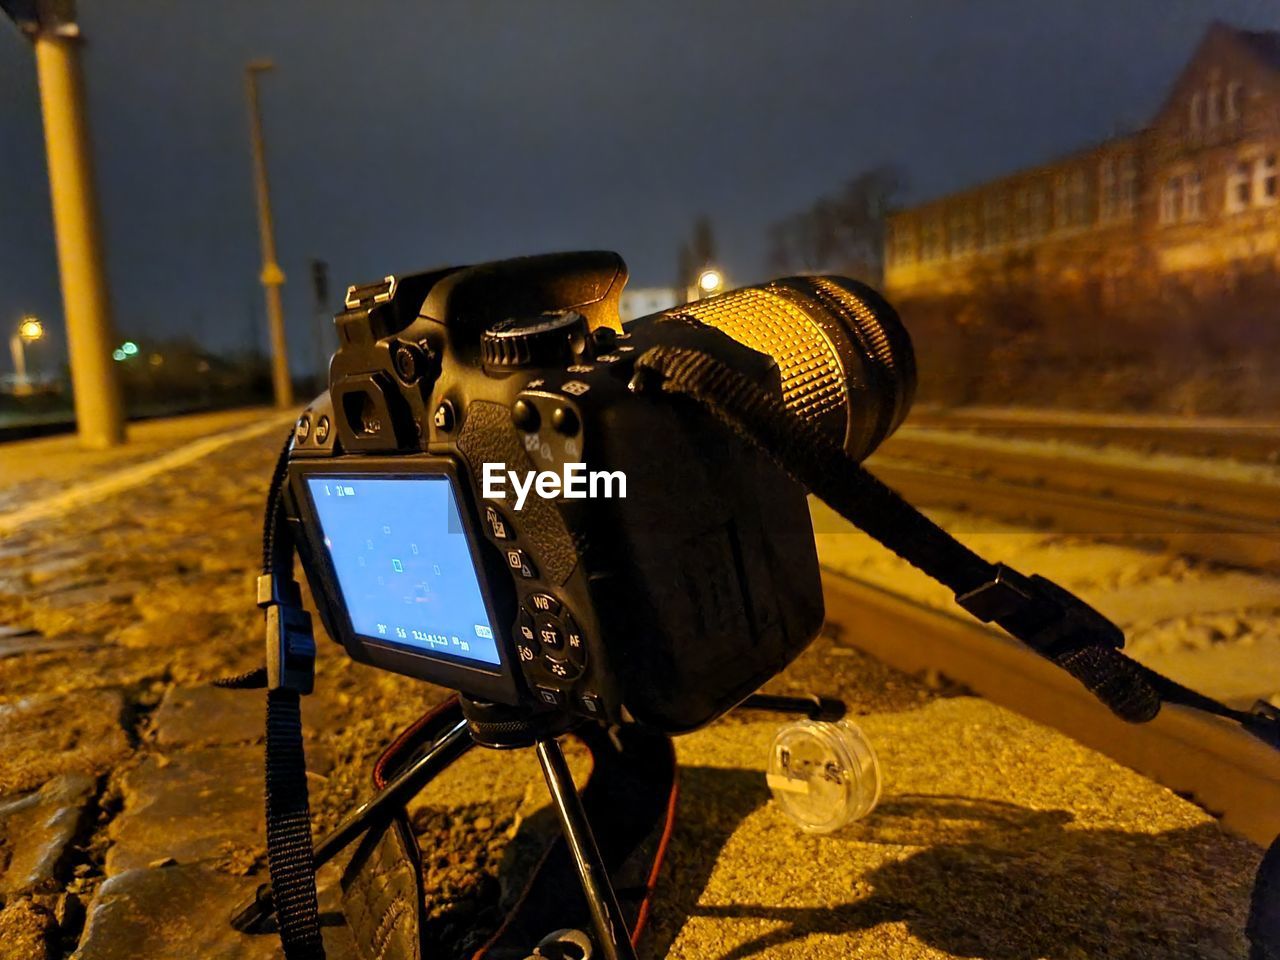 Night photography with a small stative and the new 300mm objective